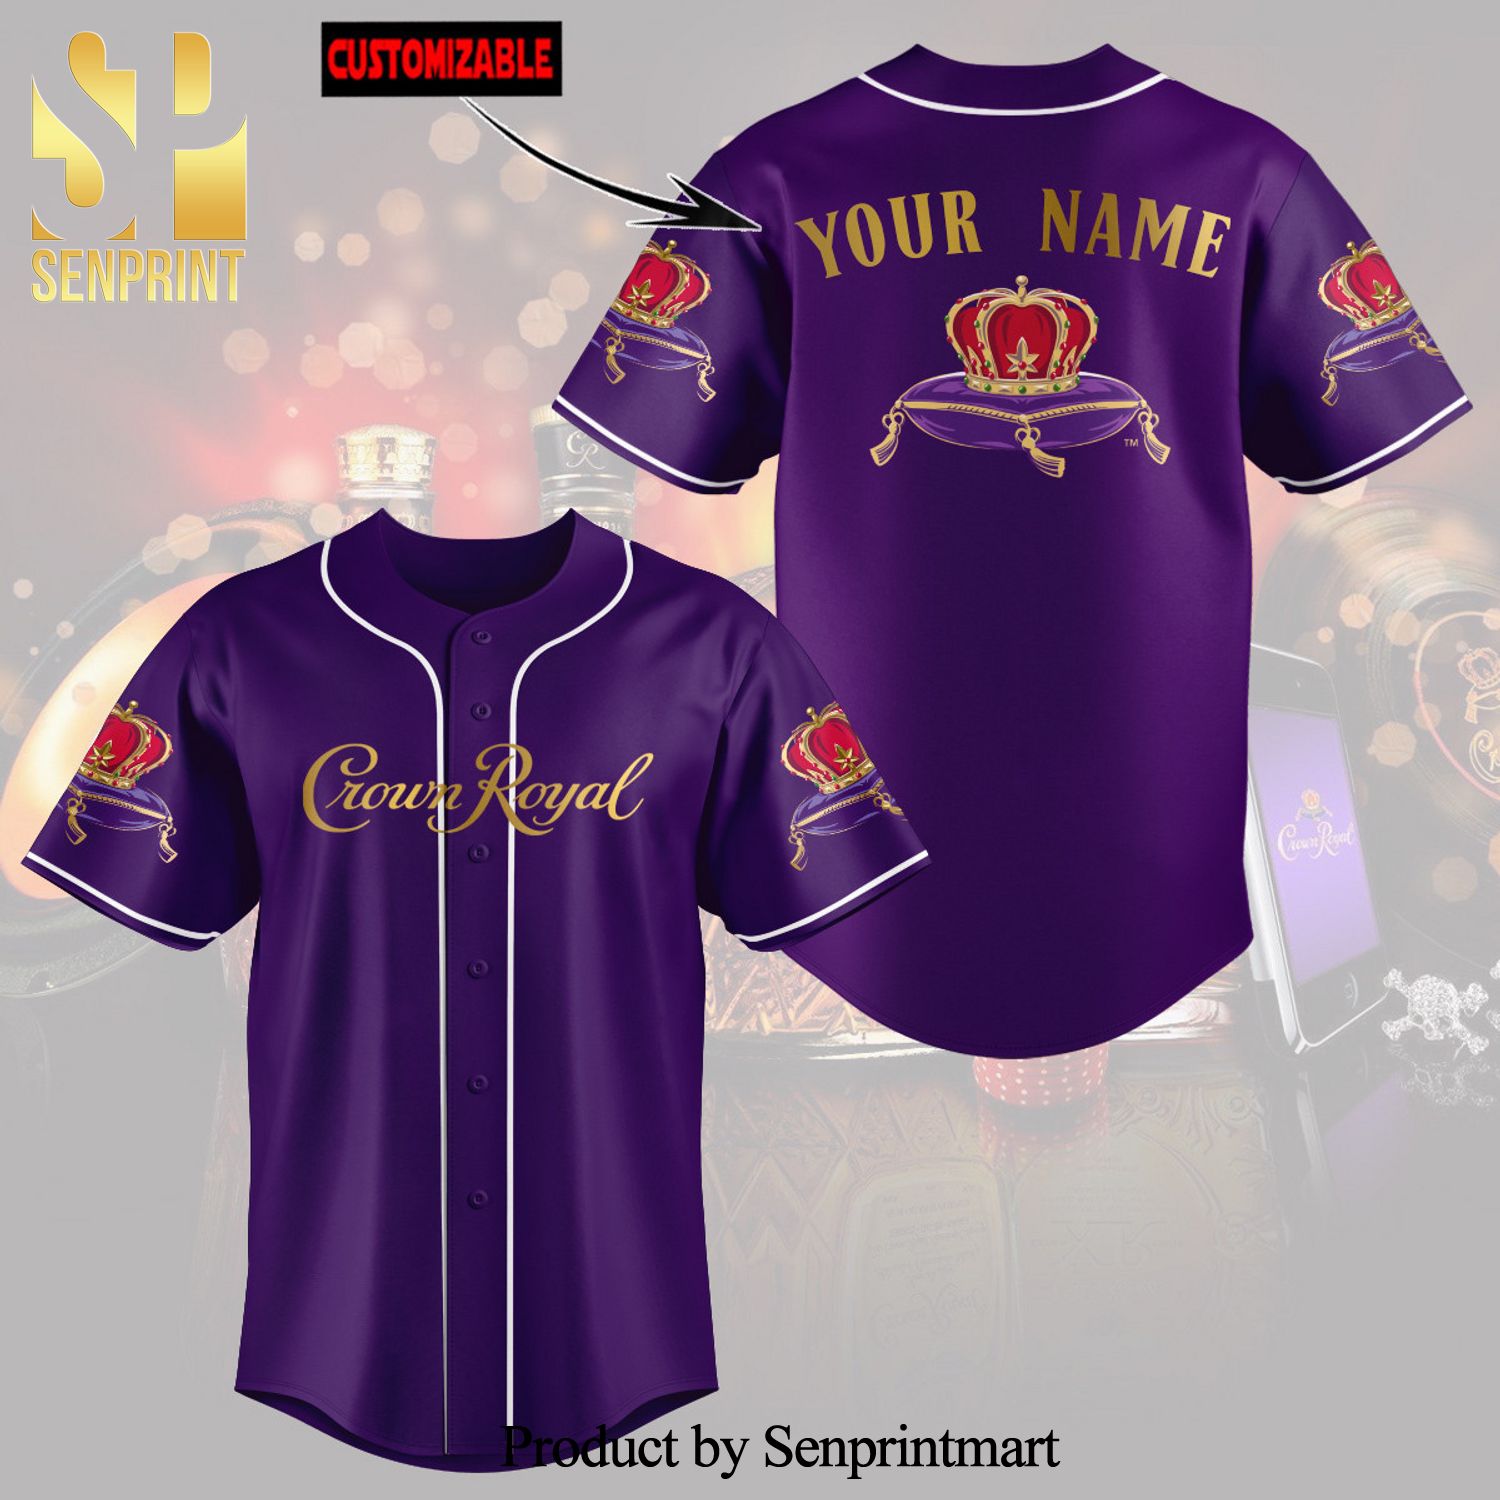 Personalized Crown Royal All Over Print Unisex Baseball Jersey - Solid Purple